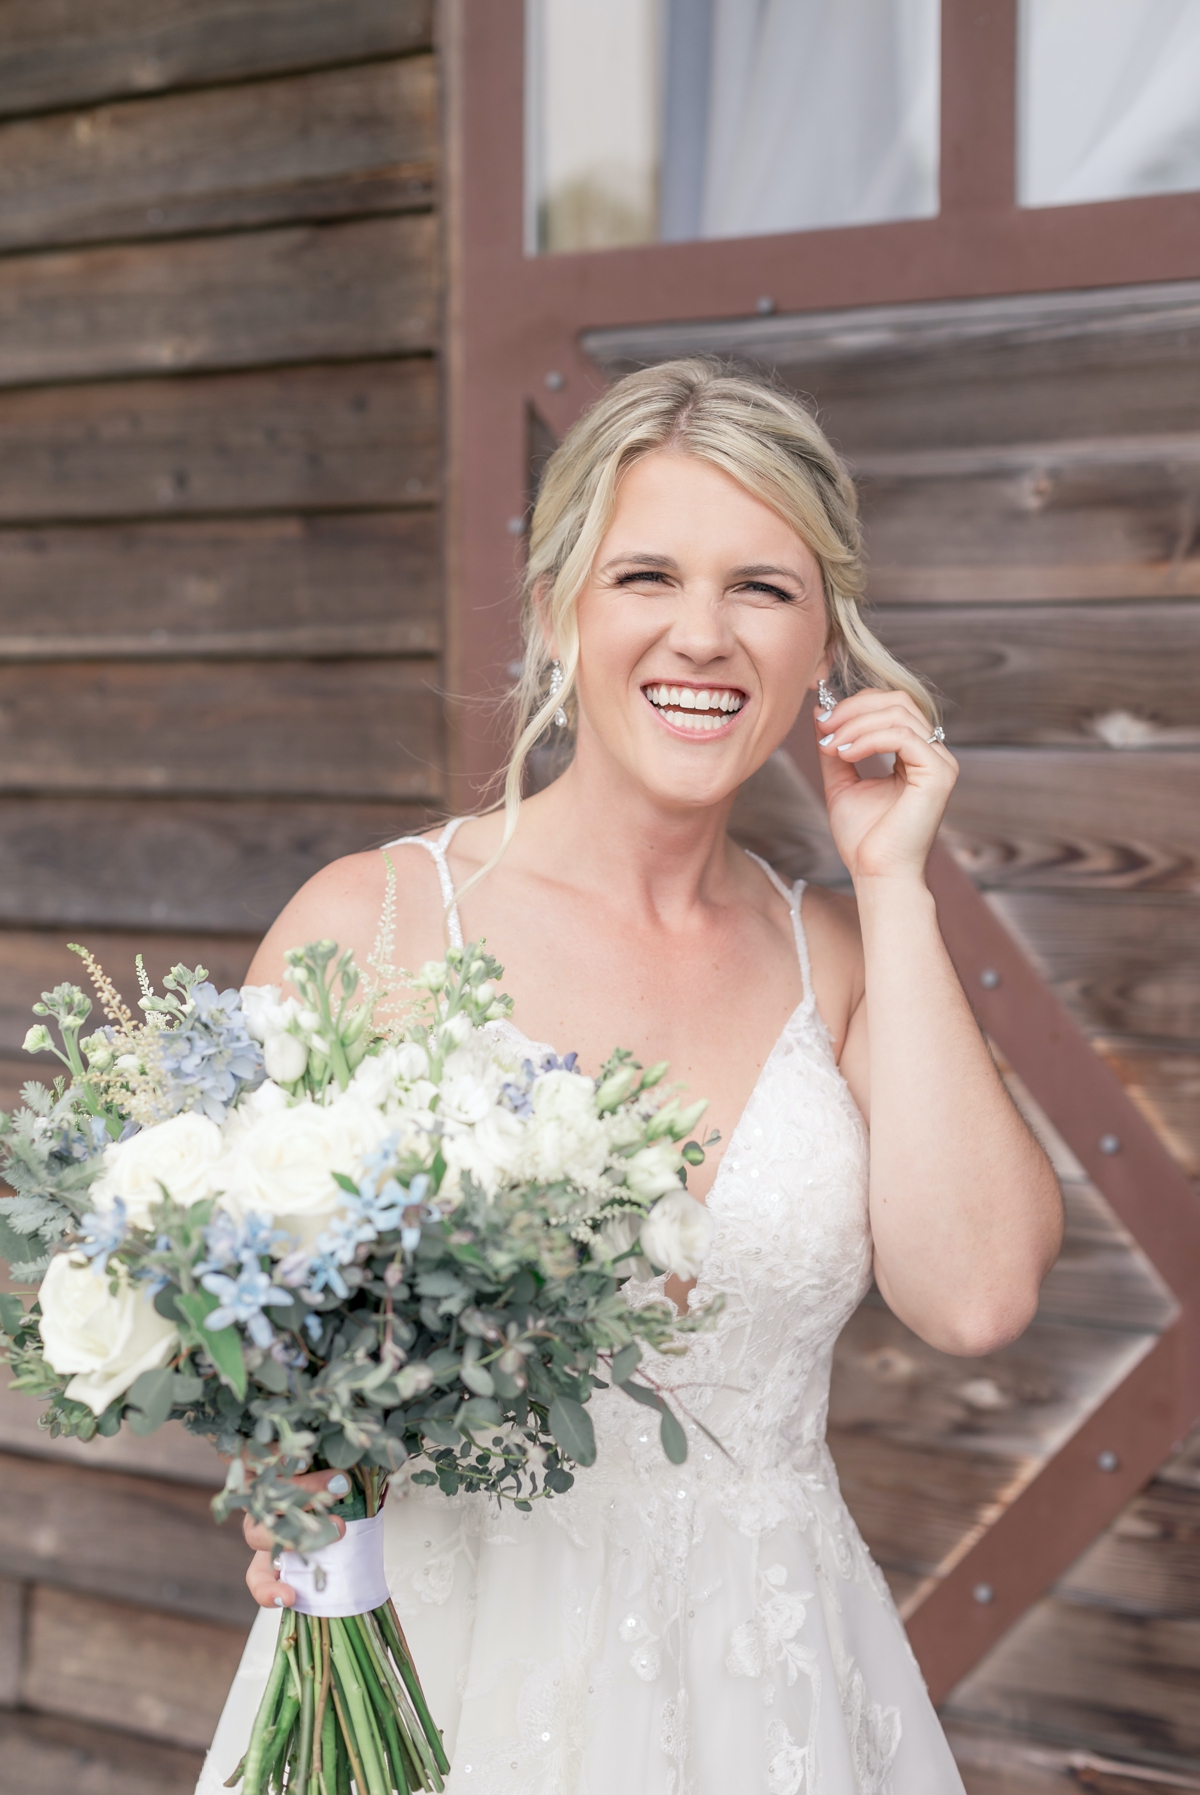 Grace smiling and laughing as she lightly touches her earring on her wedding day.